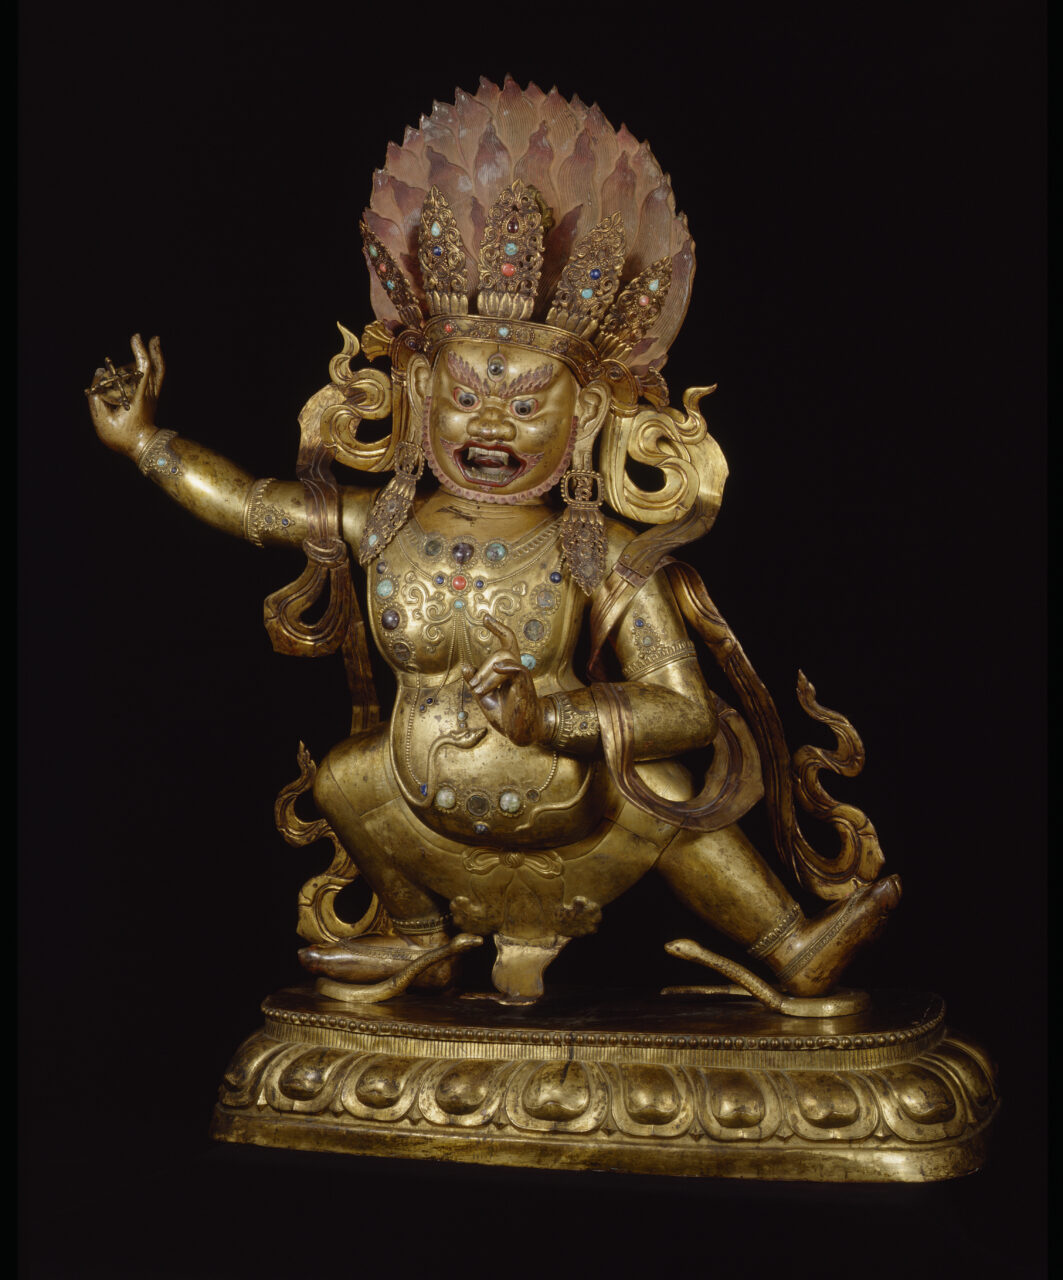 Golden-copper statue depicting wrathful crowned bodhisattva crouching in dynamic pose, holding vajra in outstretched left hand